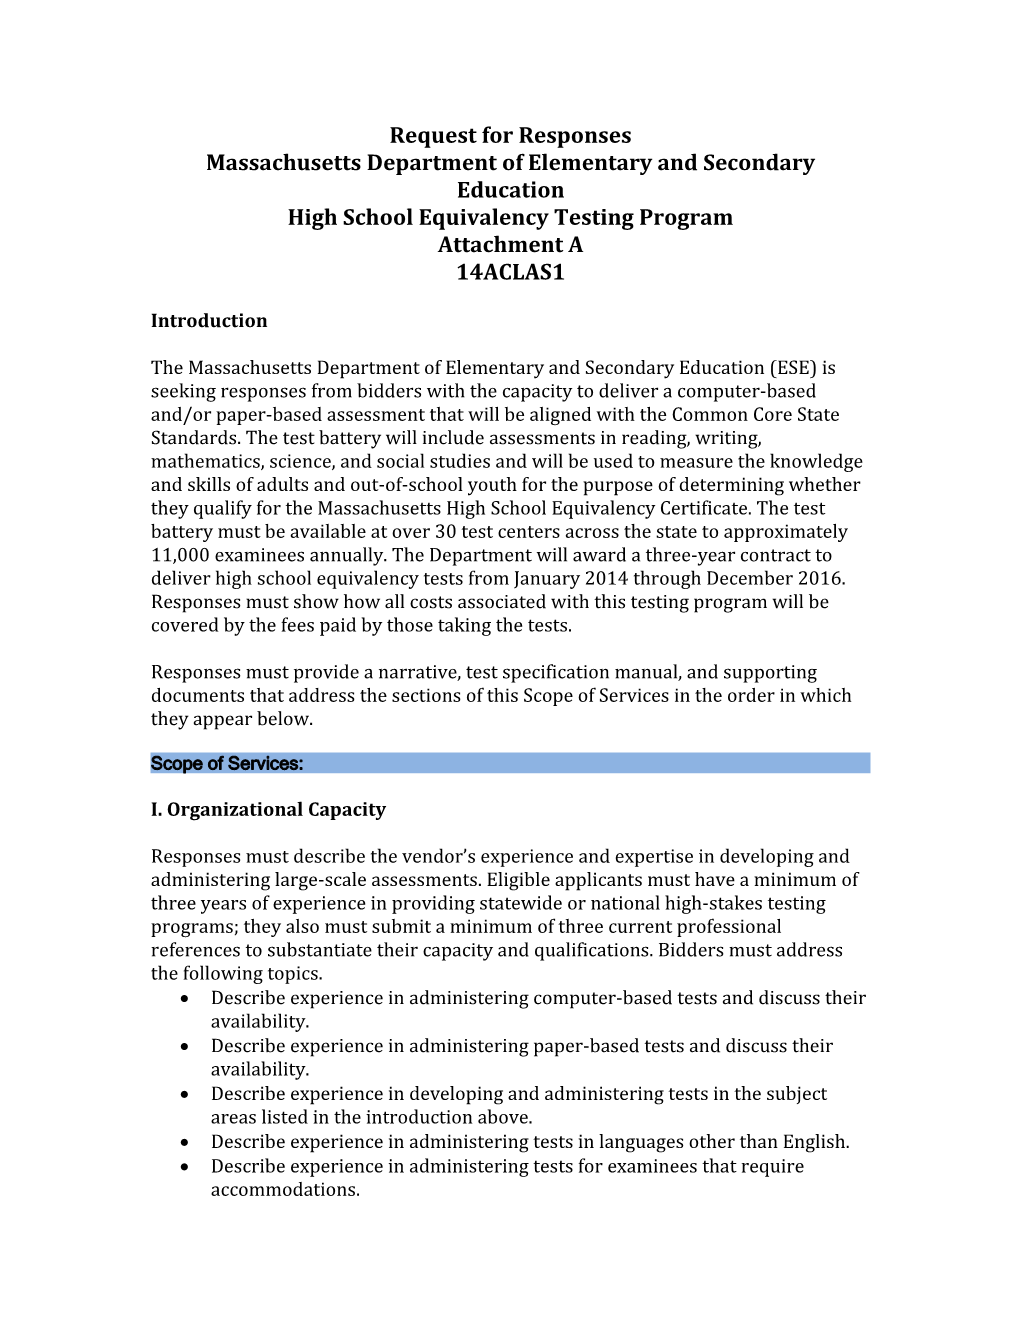 Massachusetts Department of Elementary and Secondary Education s1